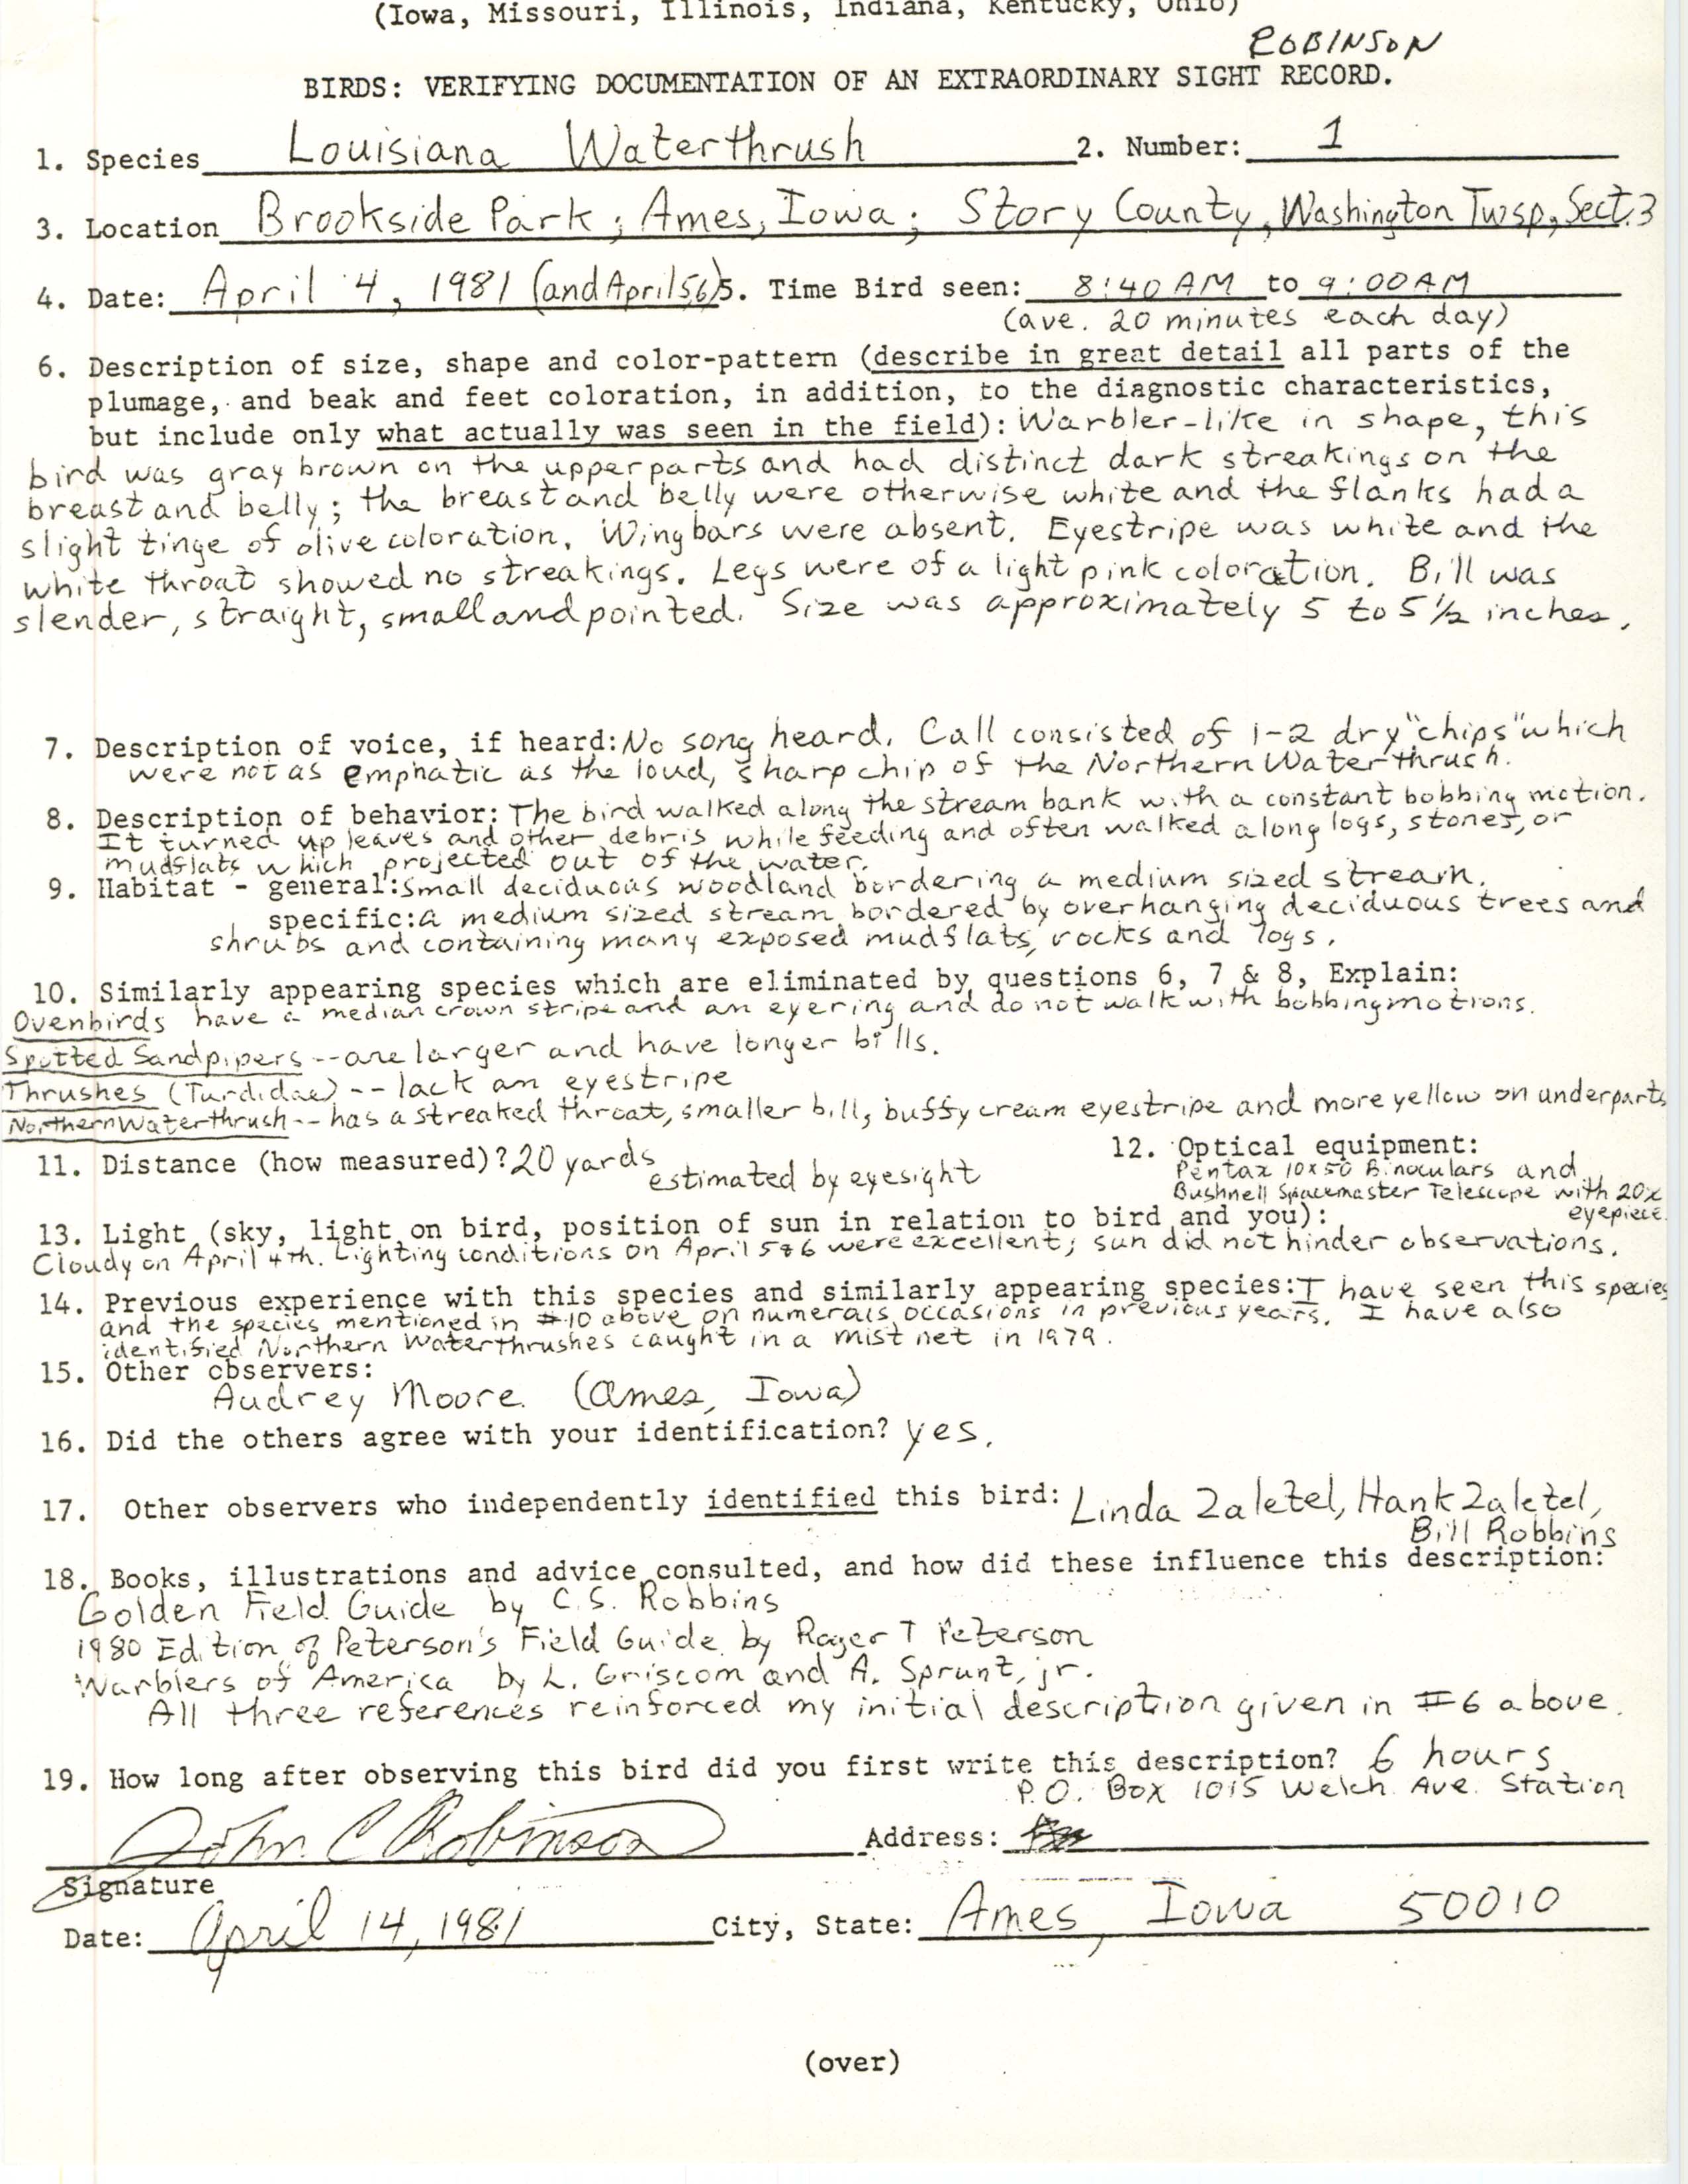 Rare bird documentation form for Louisiana Waterthrush at Brookside Park in Ames, 1981